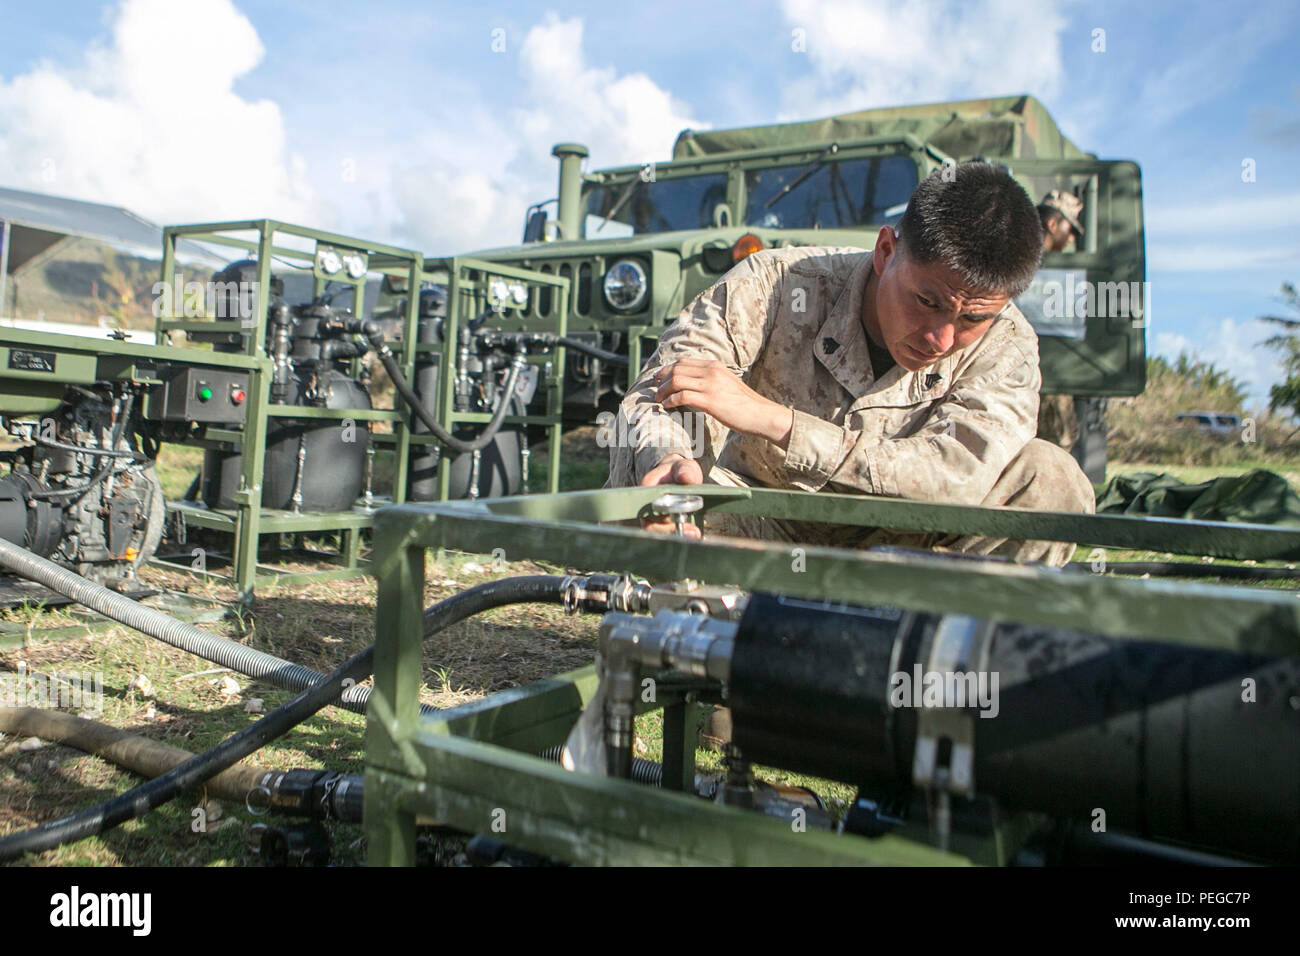 U.S. Marine Sgt. Theron Nez, with Combat Logistics Battalion 31, 31st Marine Expeditionary Unit, assembles a Light Weight Purification System as part of typhoon relief efforts in Saipan, Aug. 10, 2015. The 31st MEU and the ships of the Bonhomme Richard Amphibious Ready Group are assisting federal and local agencies with distributing emergency relief supplies to Saipan after it was struck by Typhoon Soudelor, Aug. 2-3. (U.S. Marine Corps photo by Lance Cpl. Brian Bekkala/Released) Stock Photo